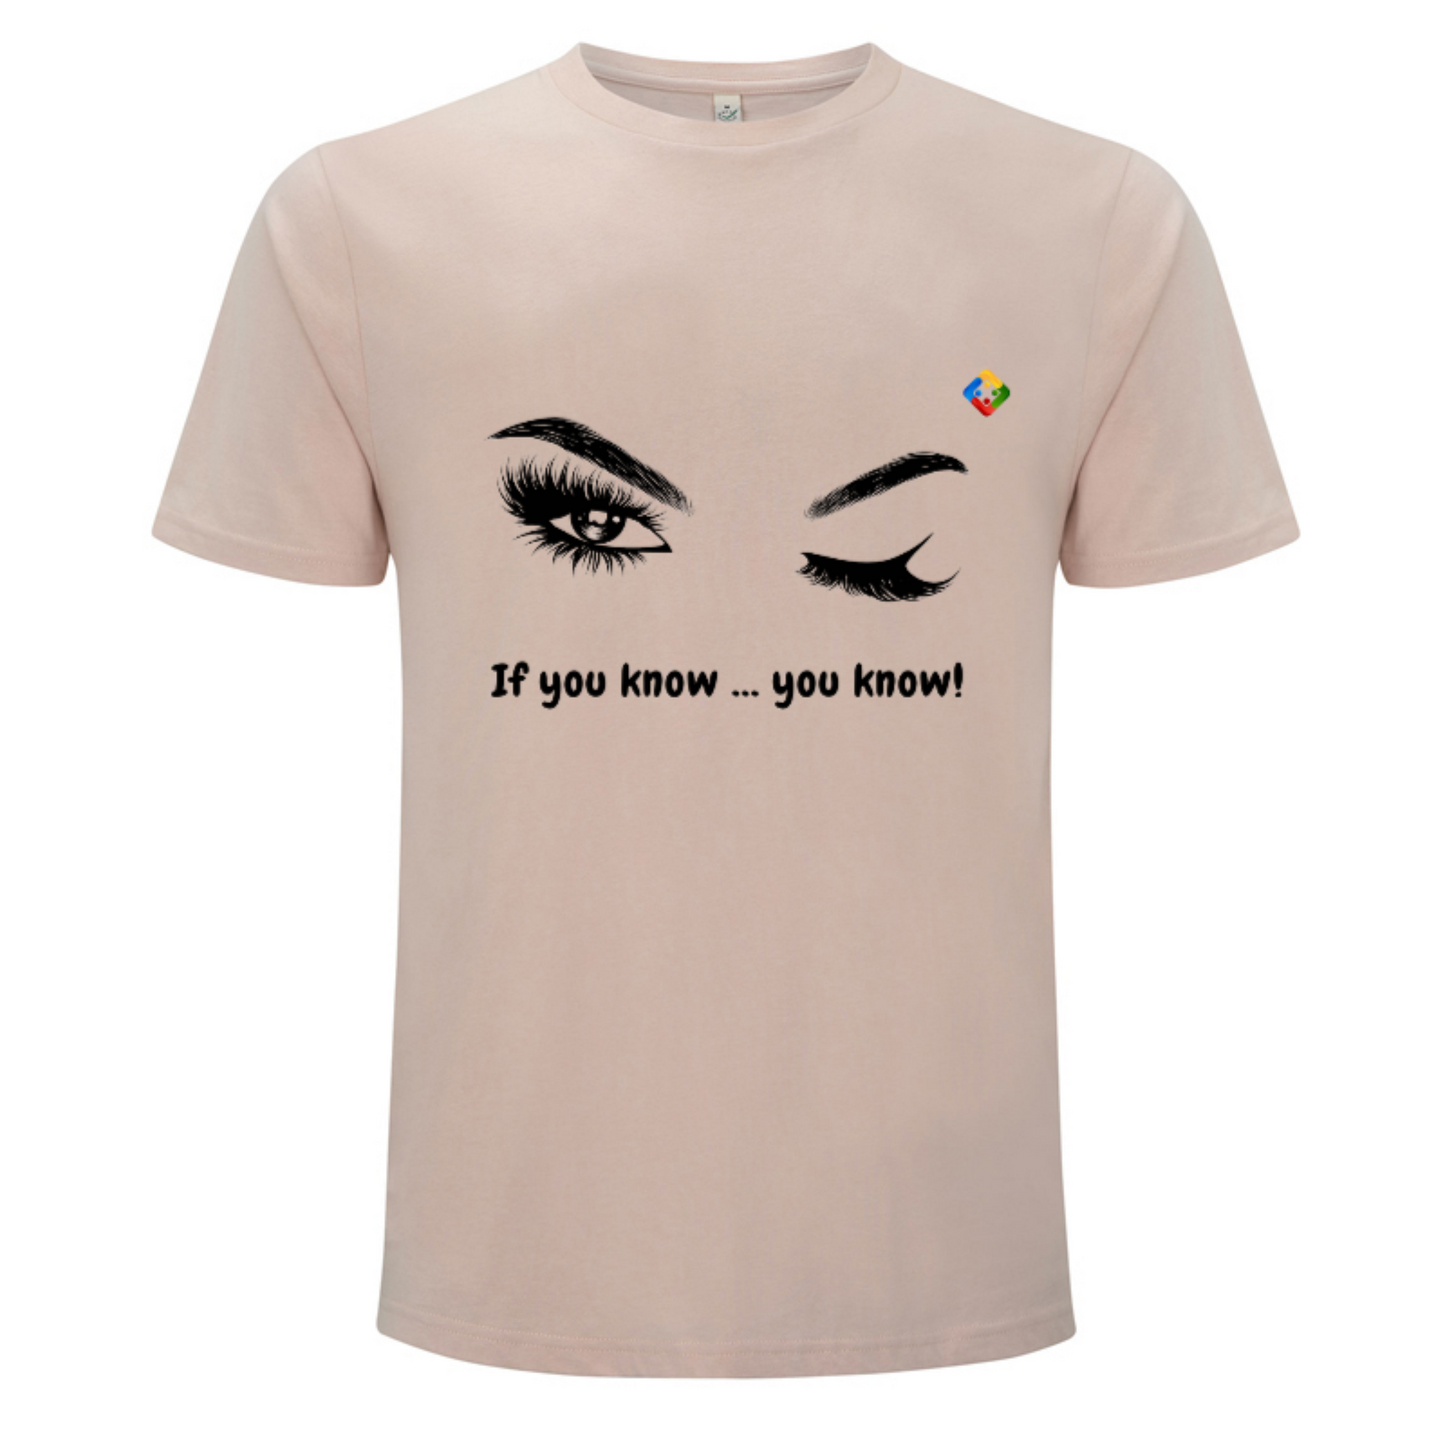 Men's organic T-shirt with printed 'If you know' design. Available in 9 colours.